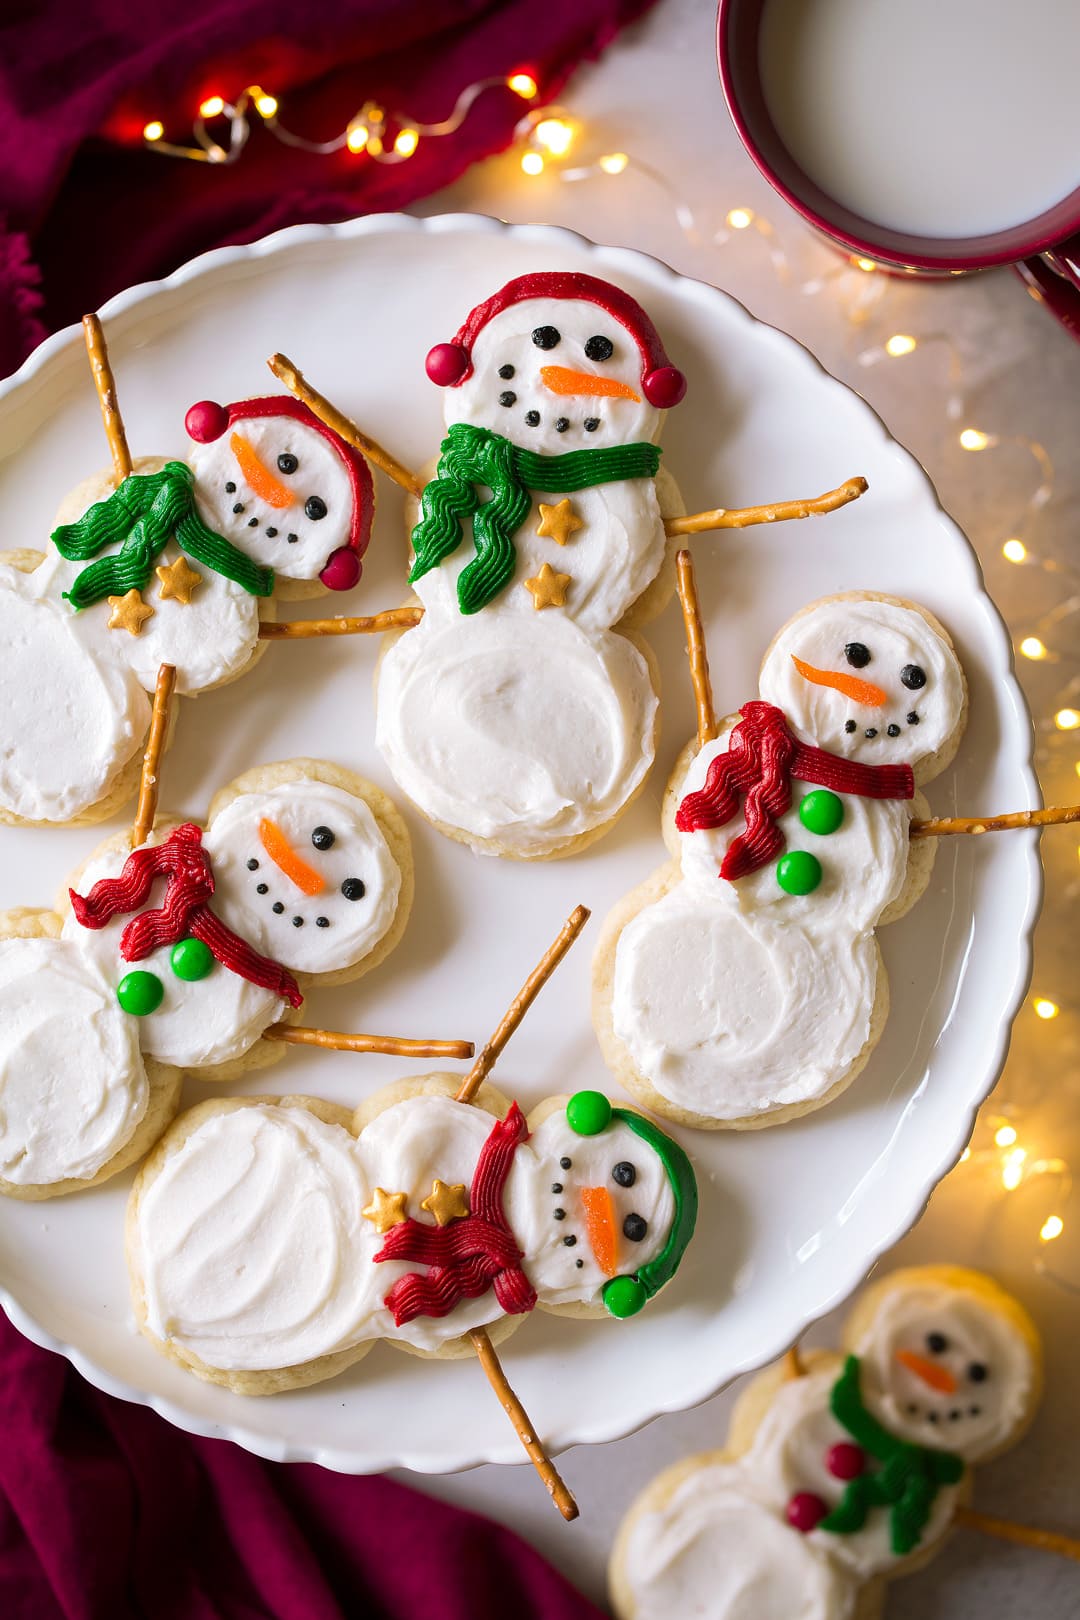 Snowman Sugar Cookies after frosting and decorating. Shown here on a cake plate with Christmas lights around plate.